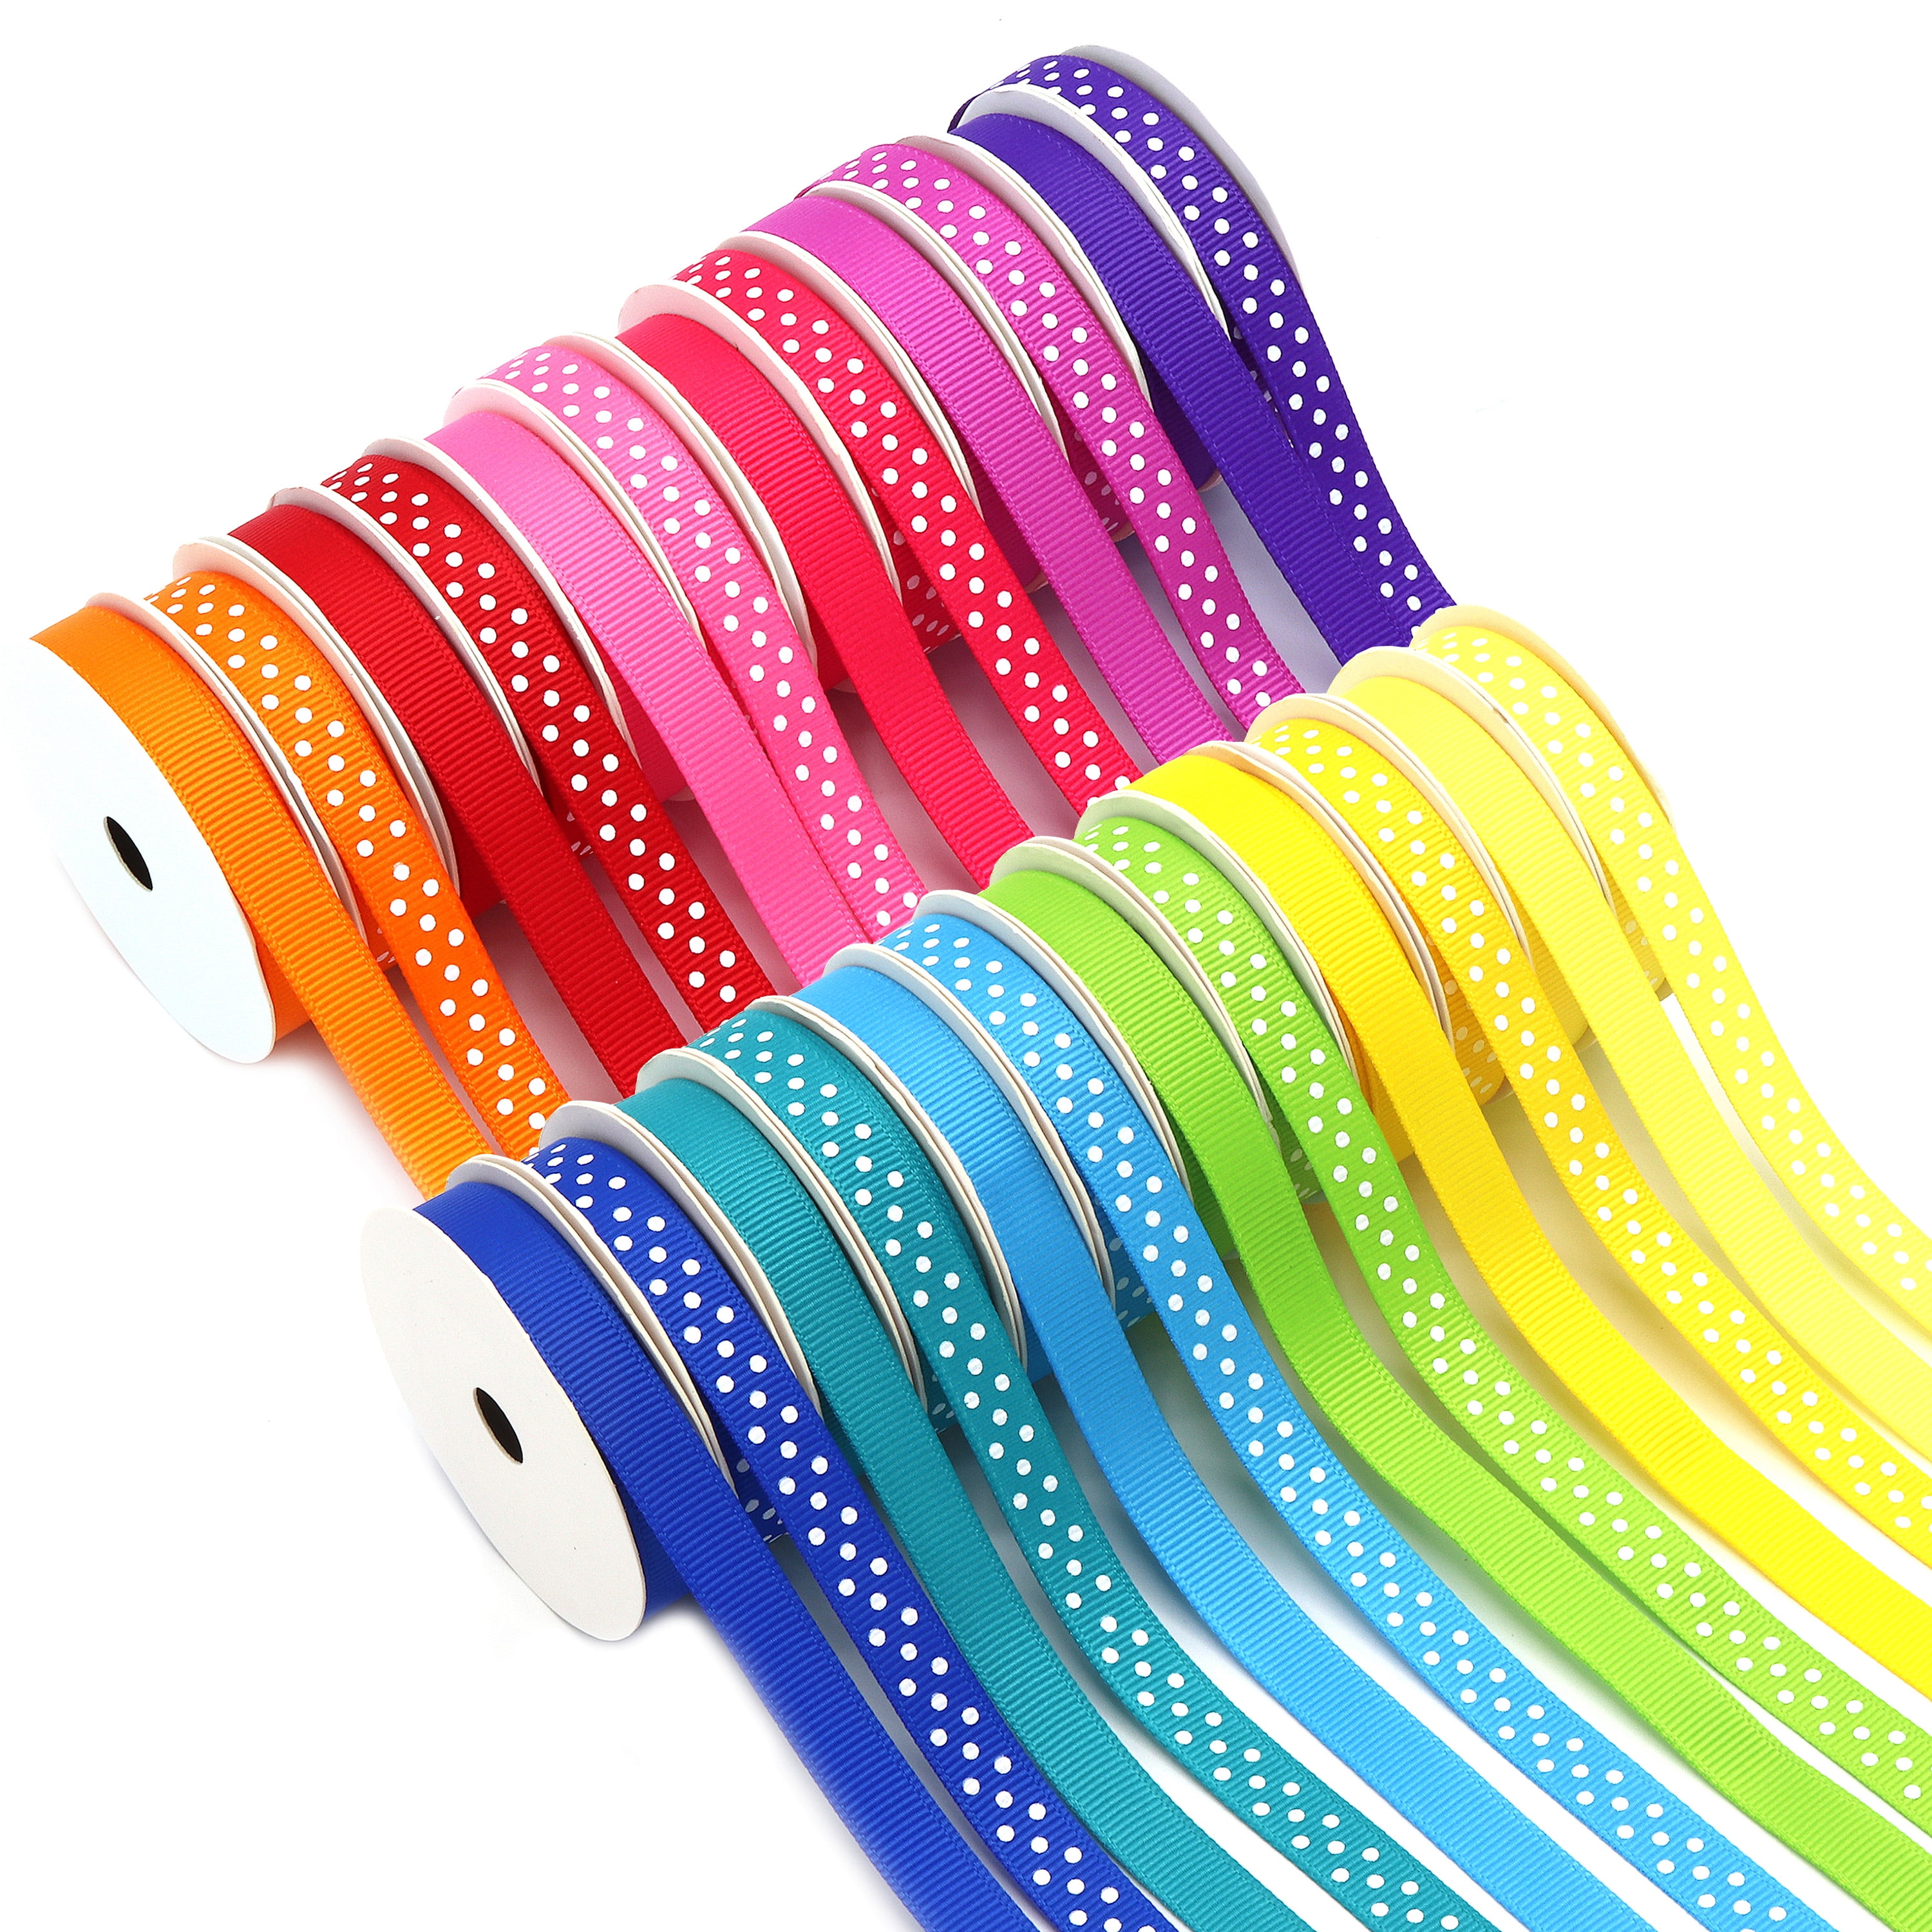 13 Rolls Grosgrain Ribbon for Crafts Sewing Hair Polka Dots Stripes Solid  Colors